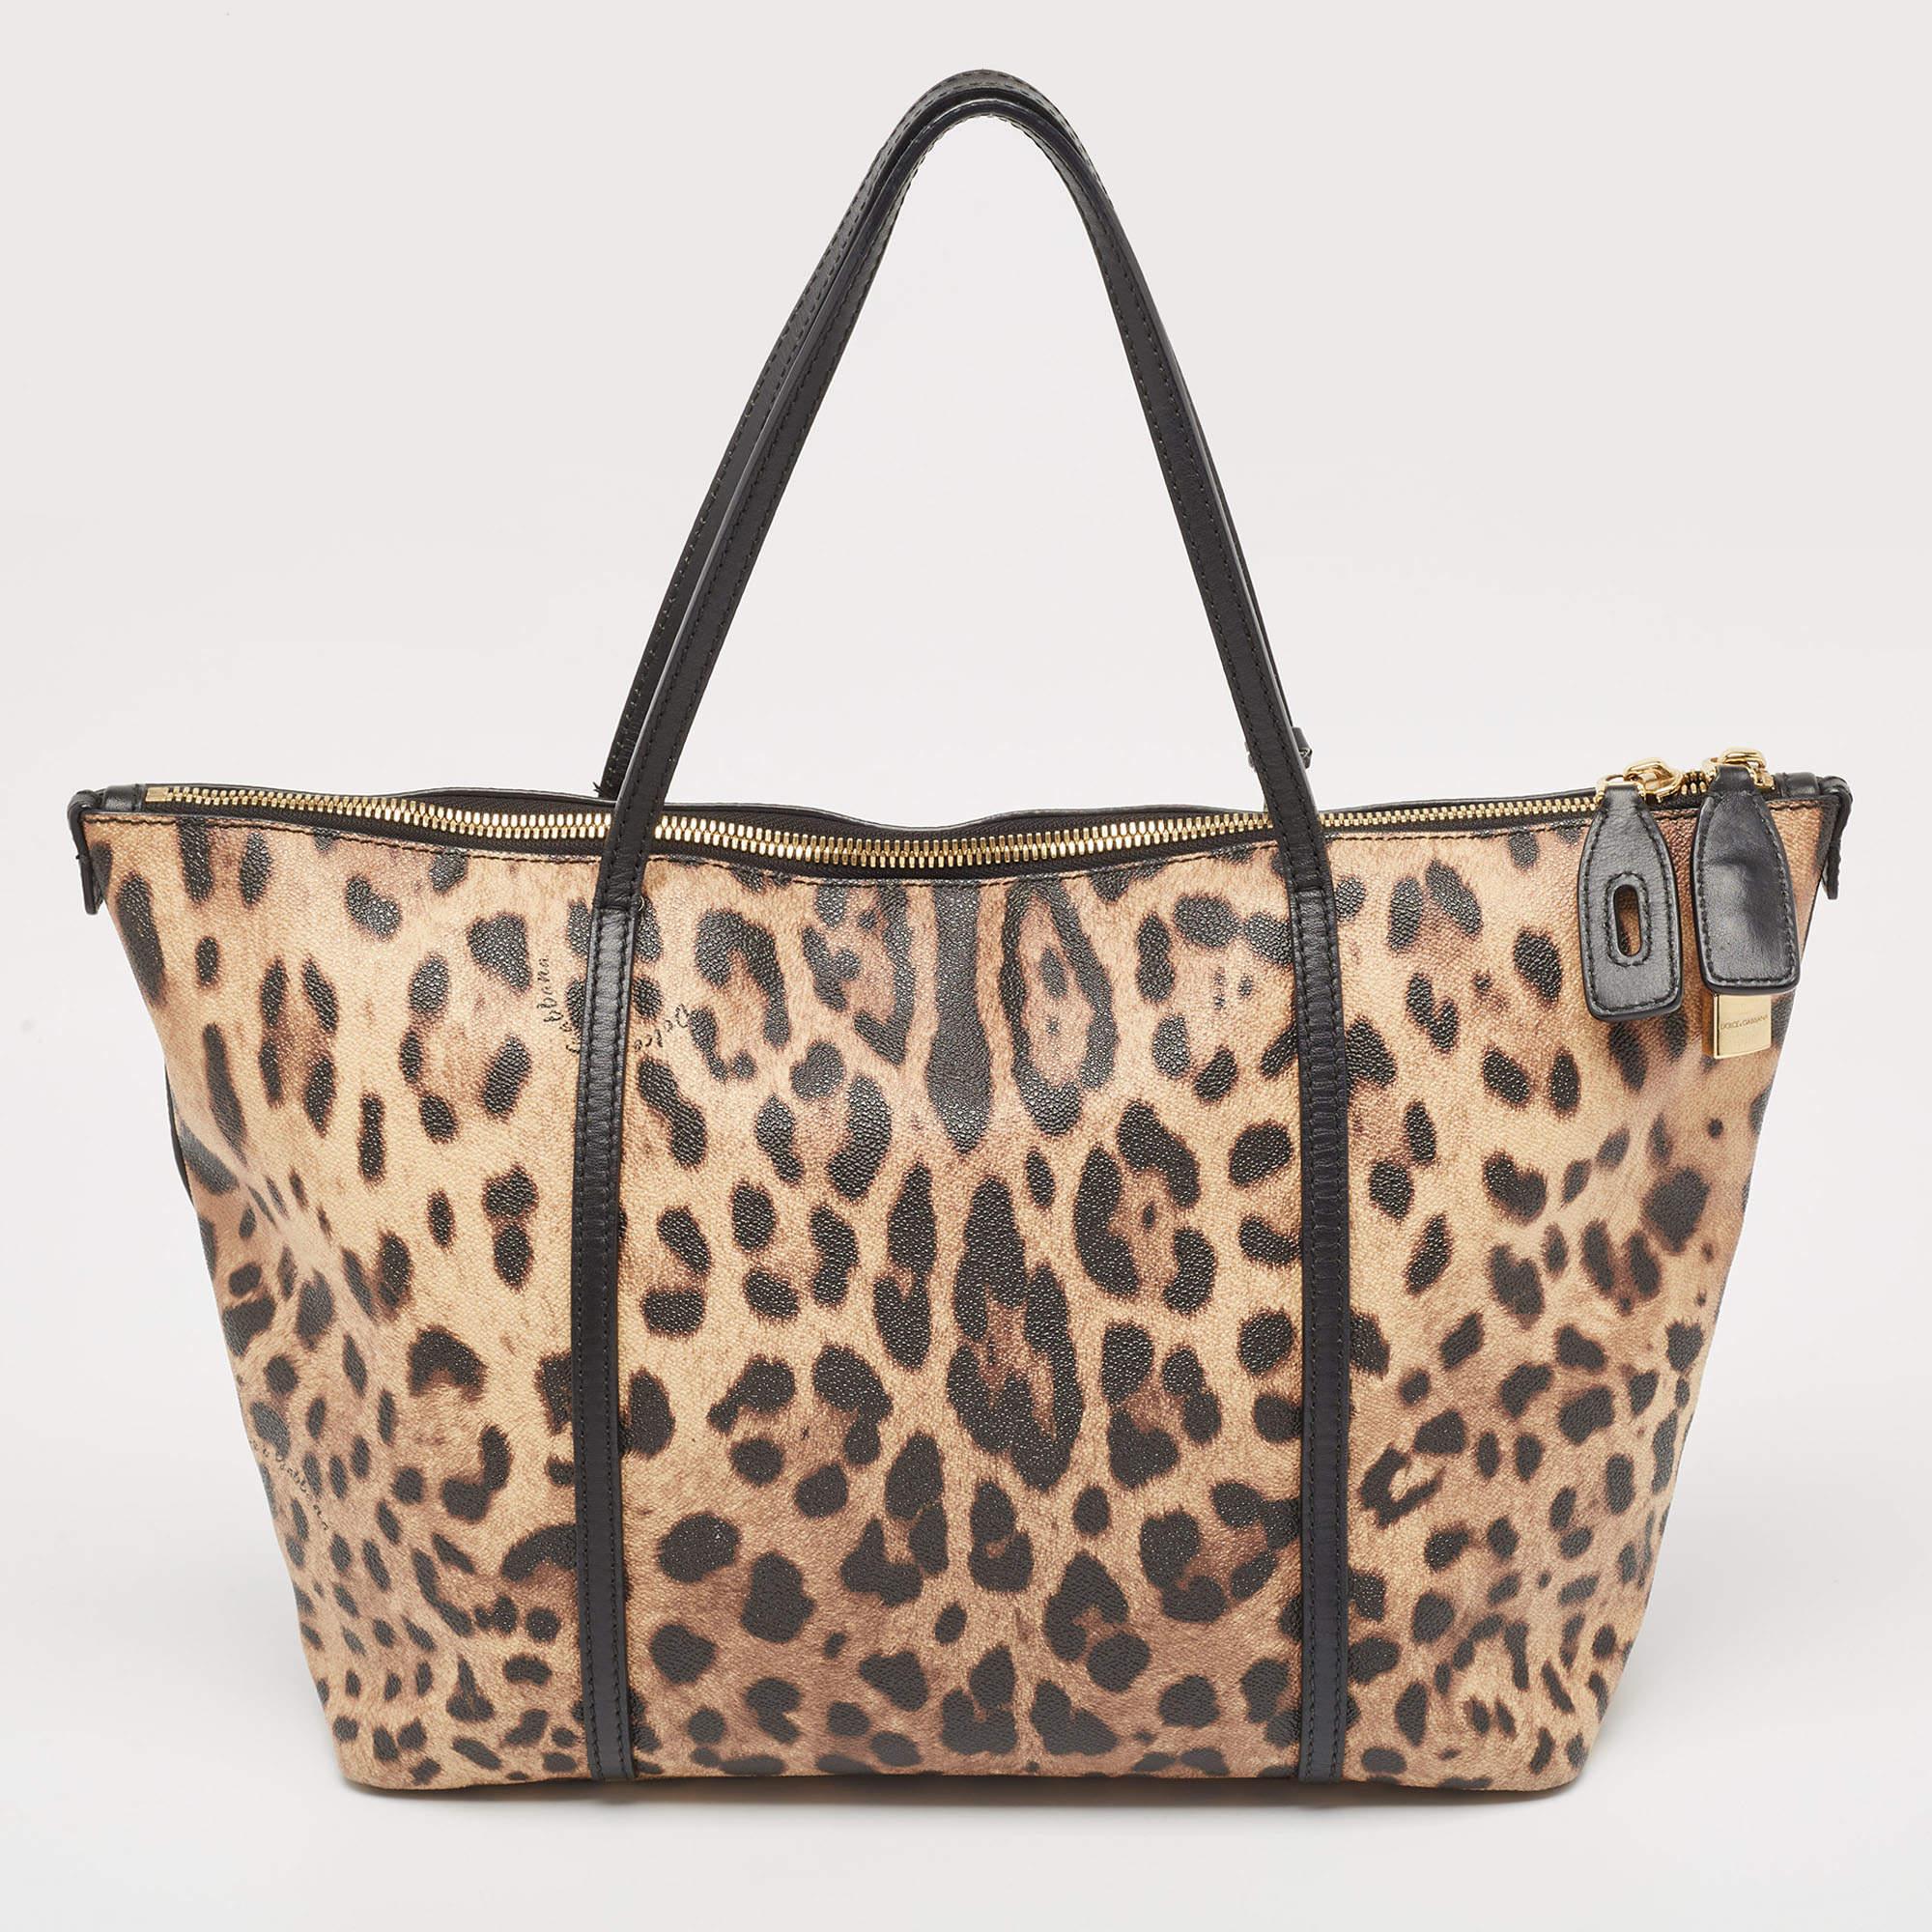 This alluring tote bag for women has been designed to assist you on any day. Convenient to carry and fashionably designed, the tote is cut with skill and sewn into a great shape. It is well-equipped to be a reliable accessory.

Includes: Original